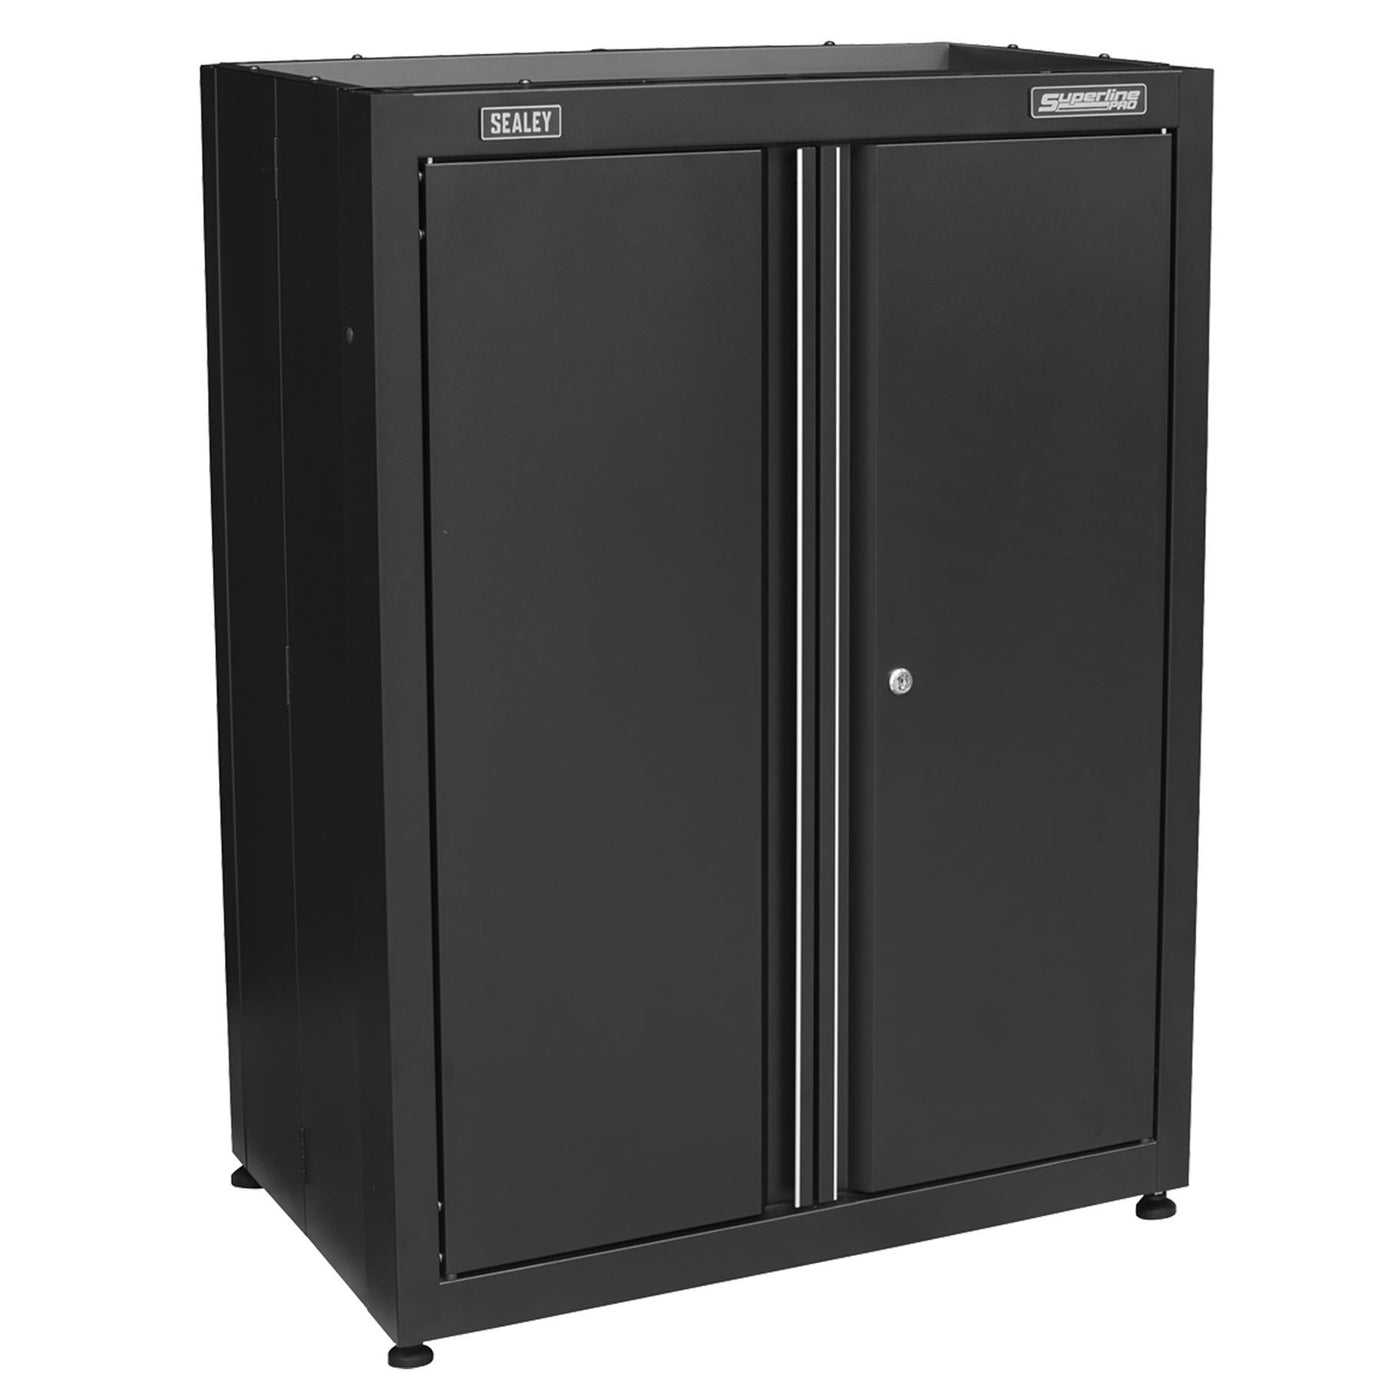 Sealey Modular Stacking Cabinet Fitted with magnetic door latches